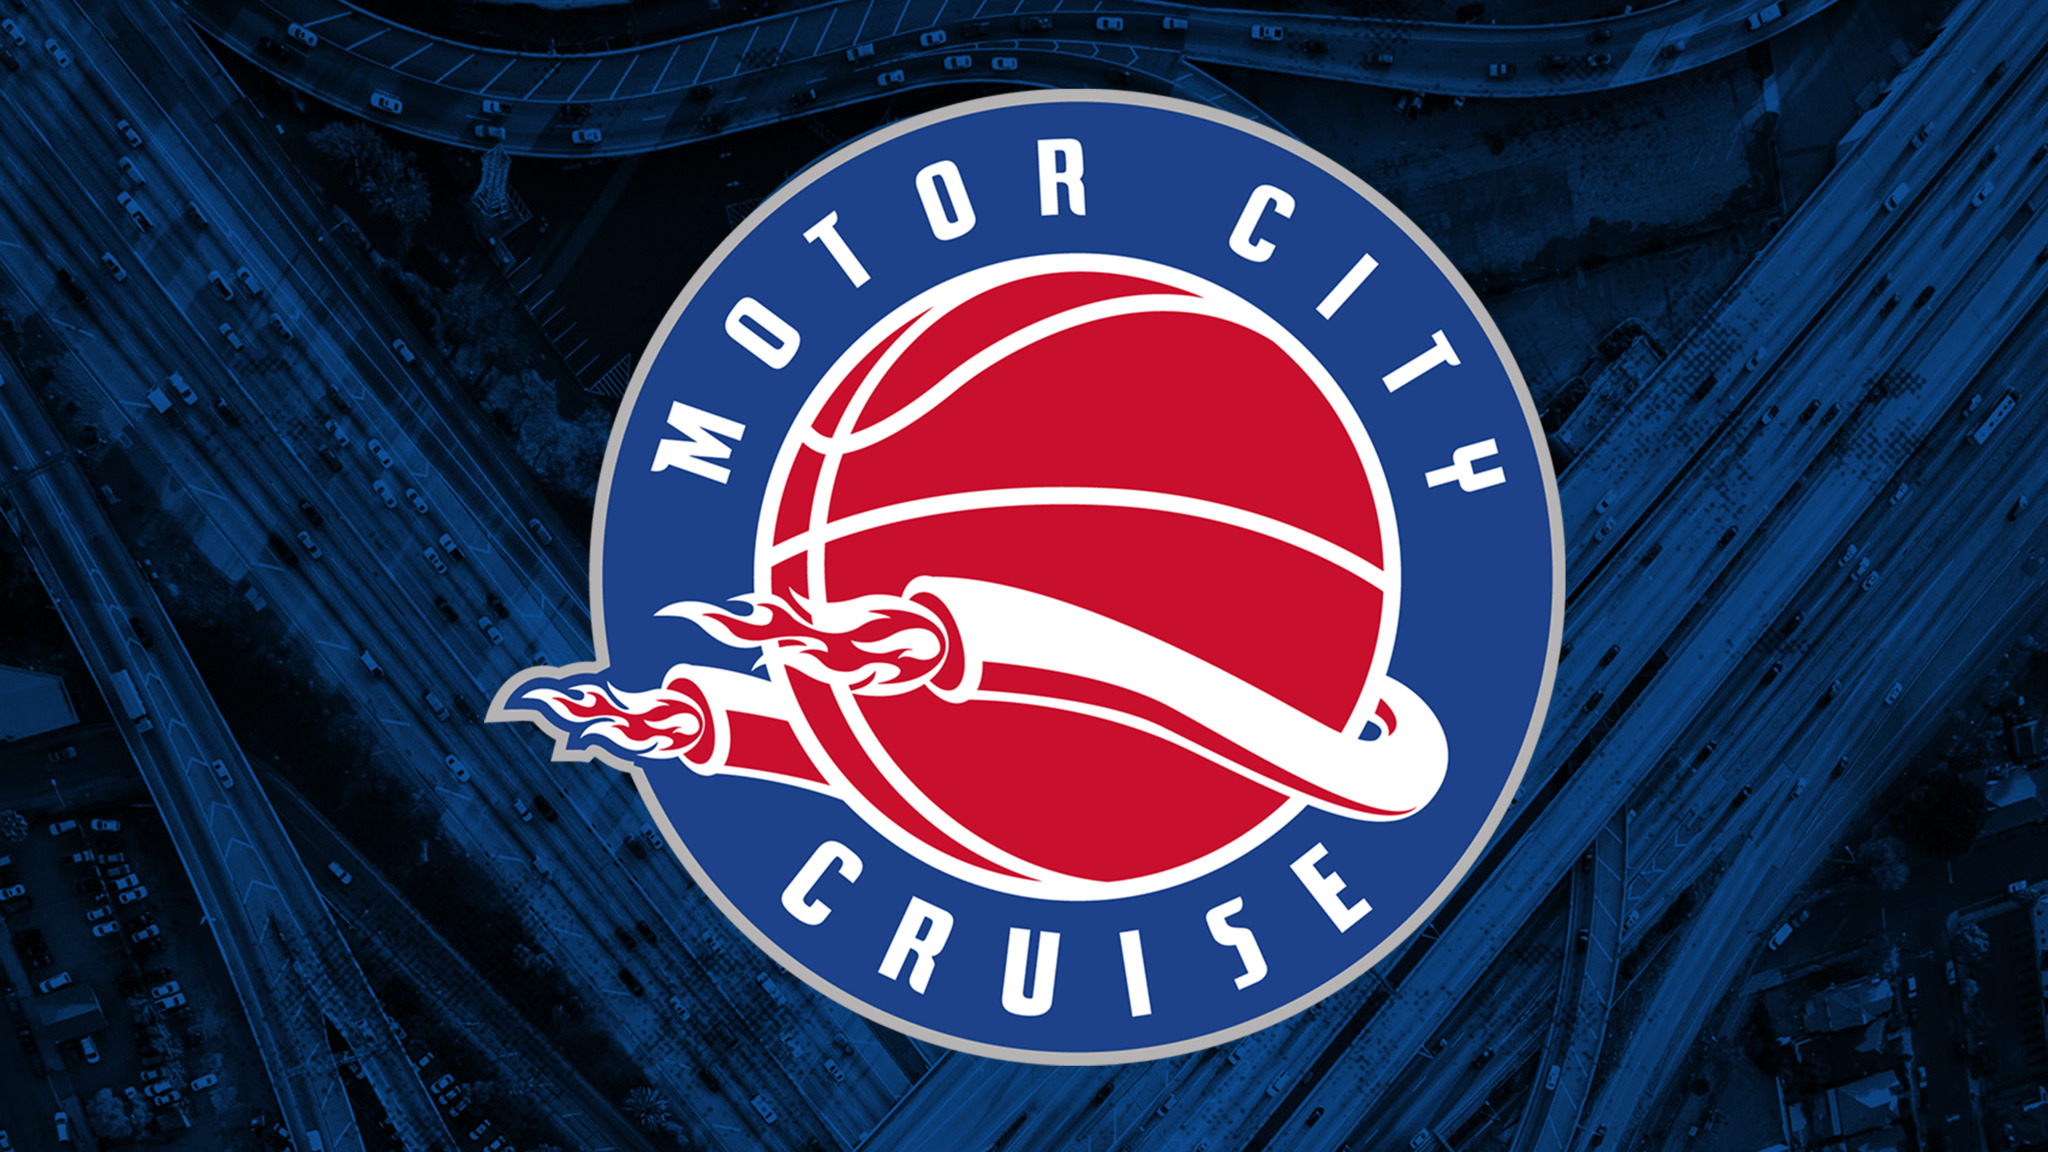 Motor City Cruise Tickets Single Game Tickets & Schedule